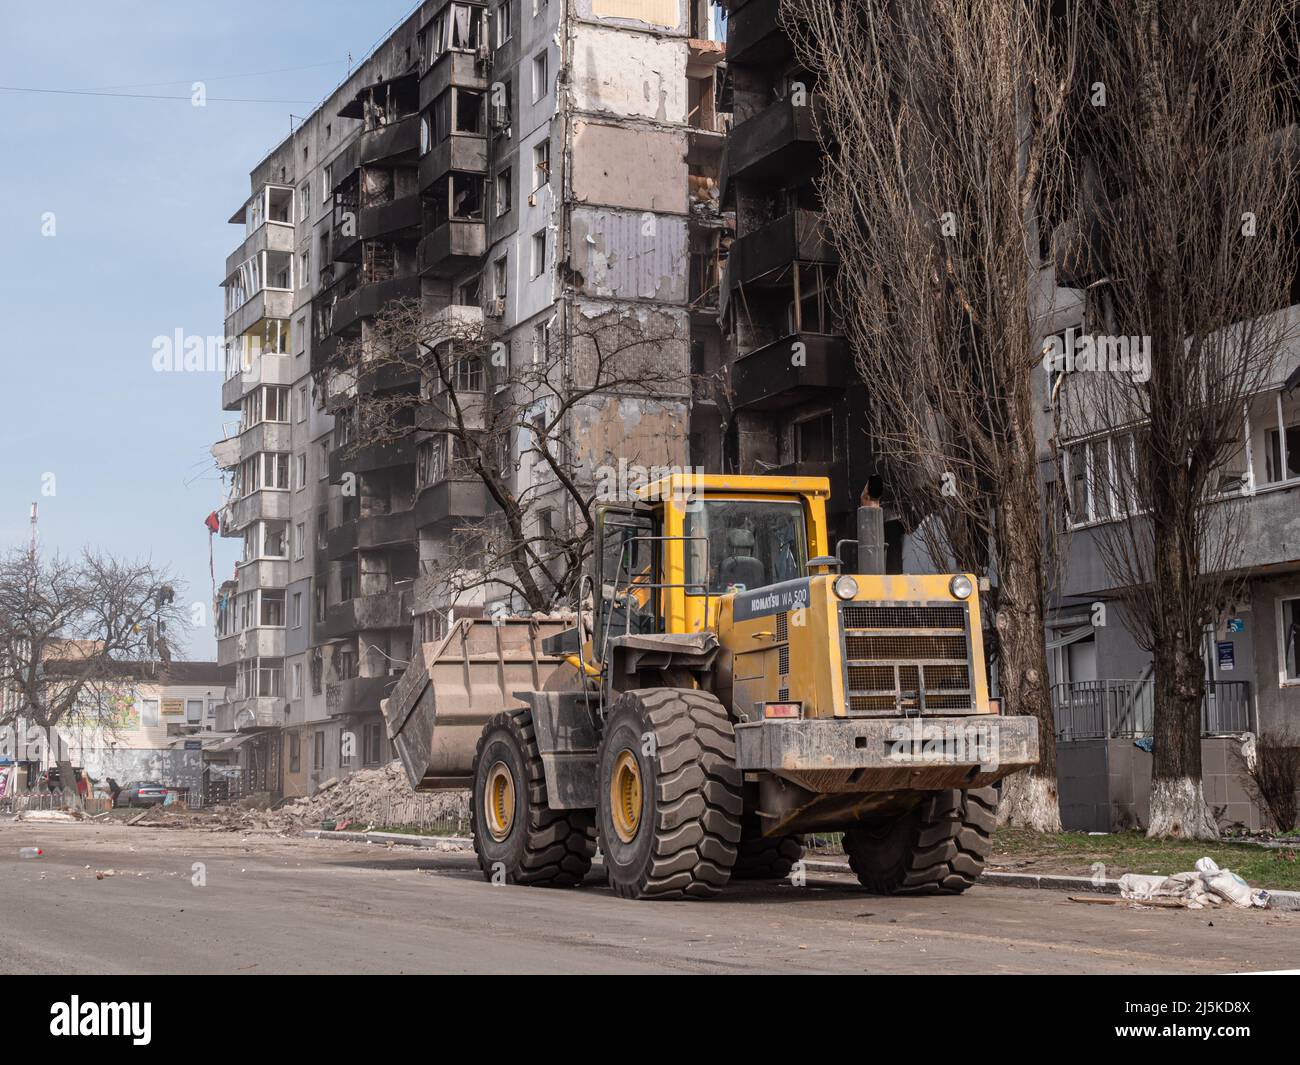 Borodyanka, Ukraine - April 2022: Excavator loads construction waste into truck for removal from site of explosion and destruction of building. Destroyed houses after rocket and air strikes. Stock Photo